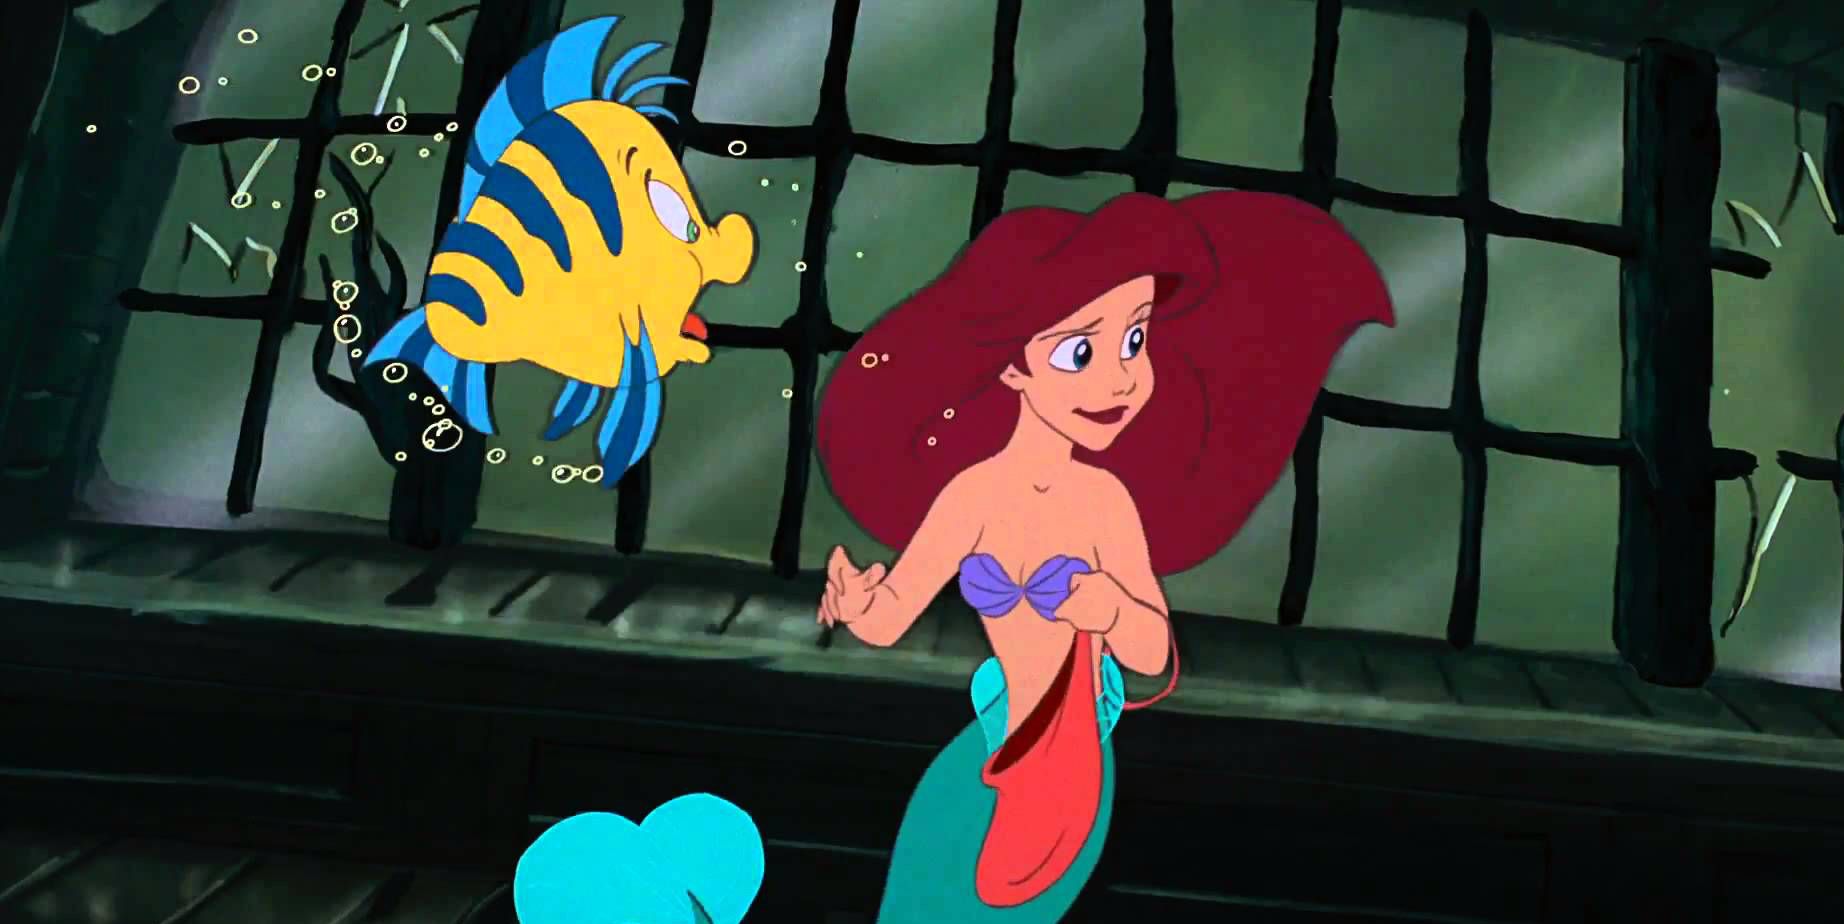 Flounder and Ariel in a shipwreck in the 1989 animated Little Mermaid movie